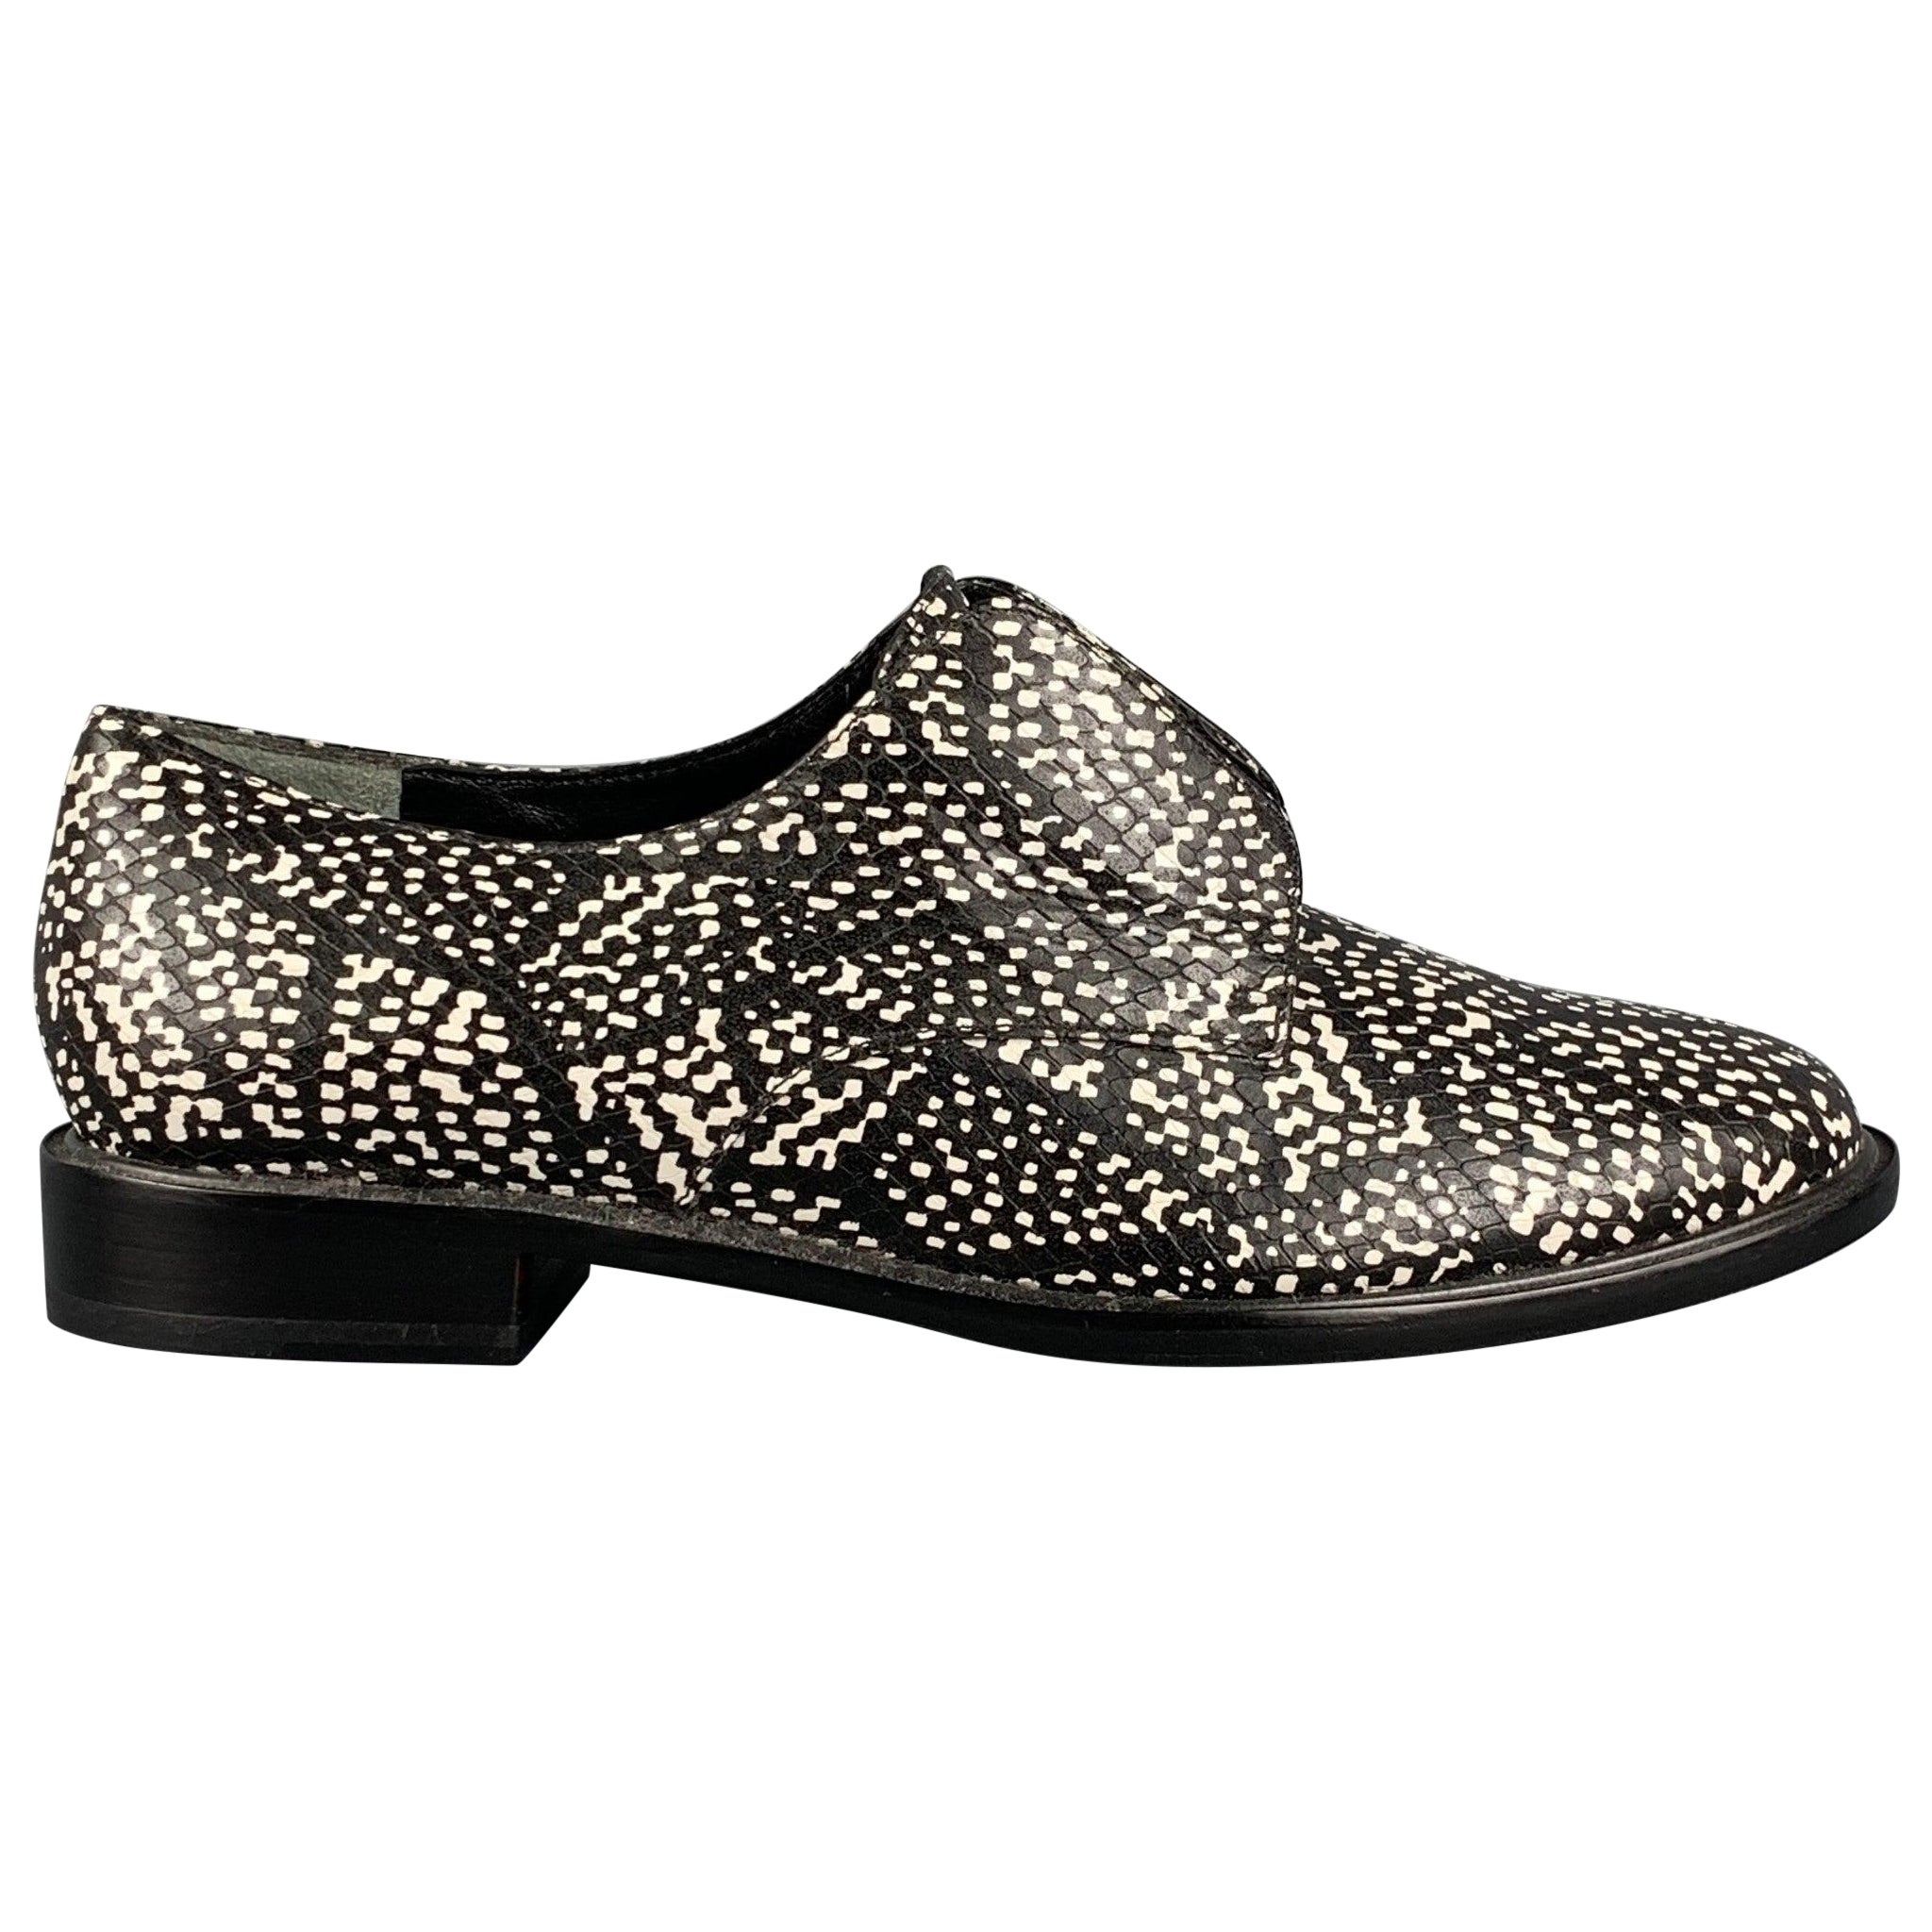 ROBERT CLERGERIE Size 7.5 Black White Leather Print Laceless Shoes For Sale